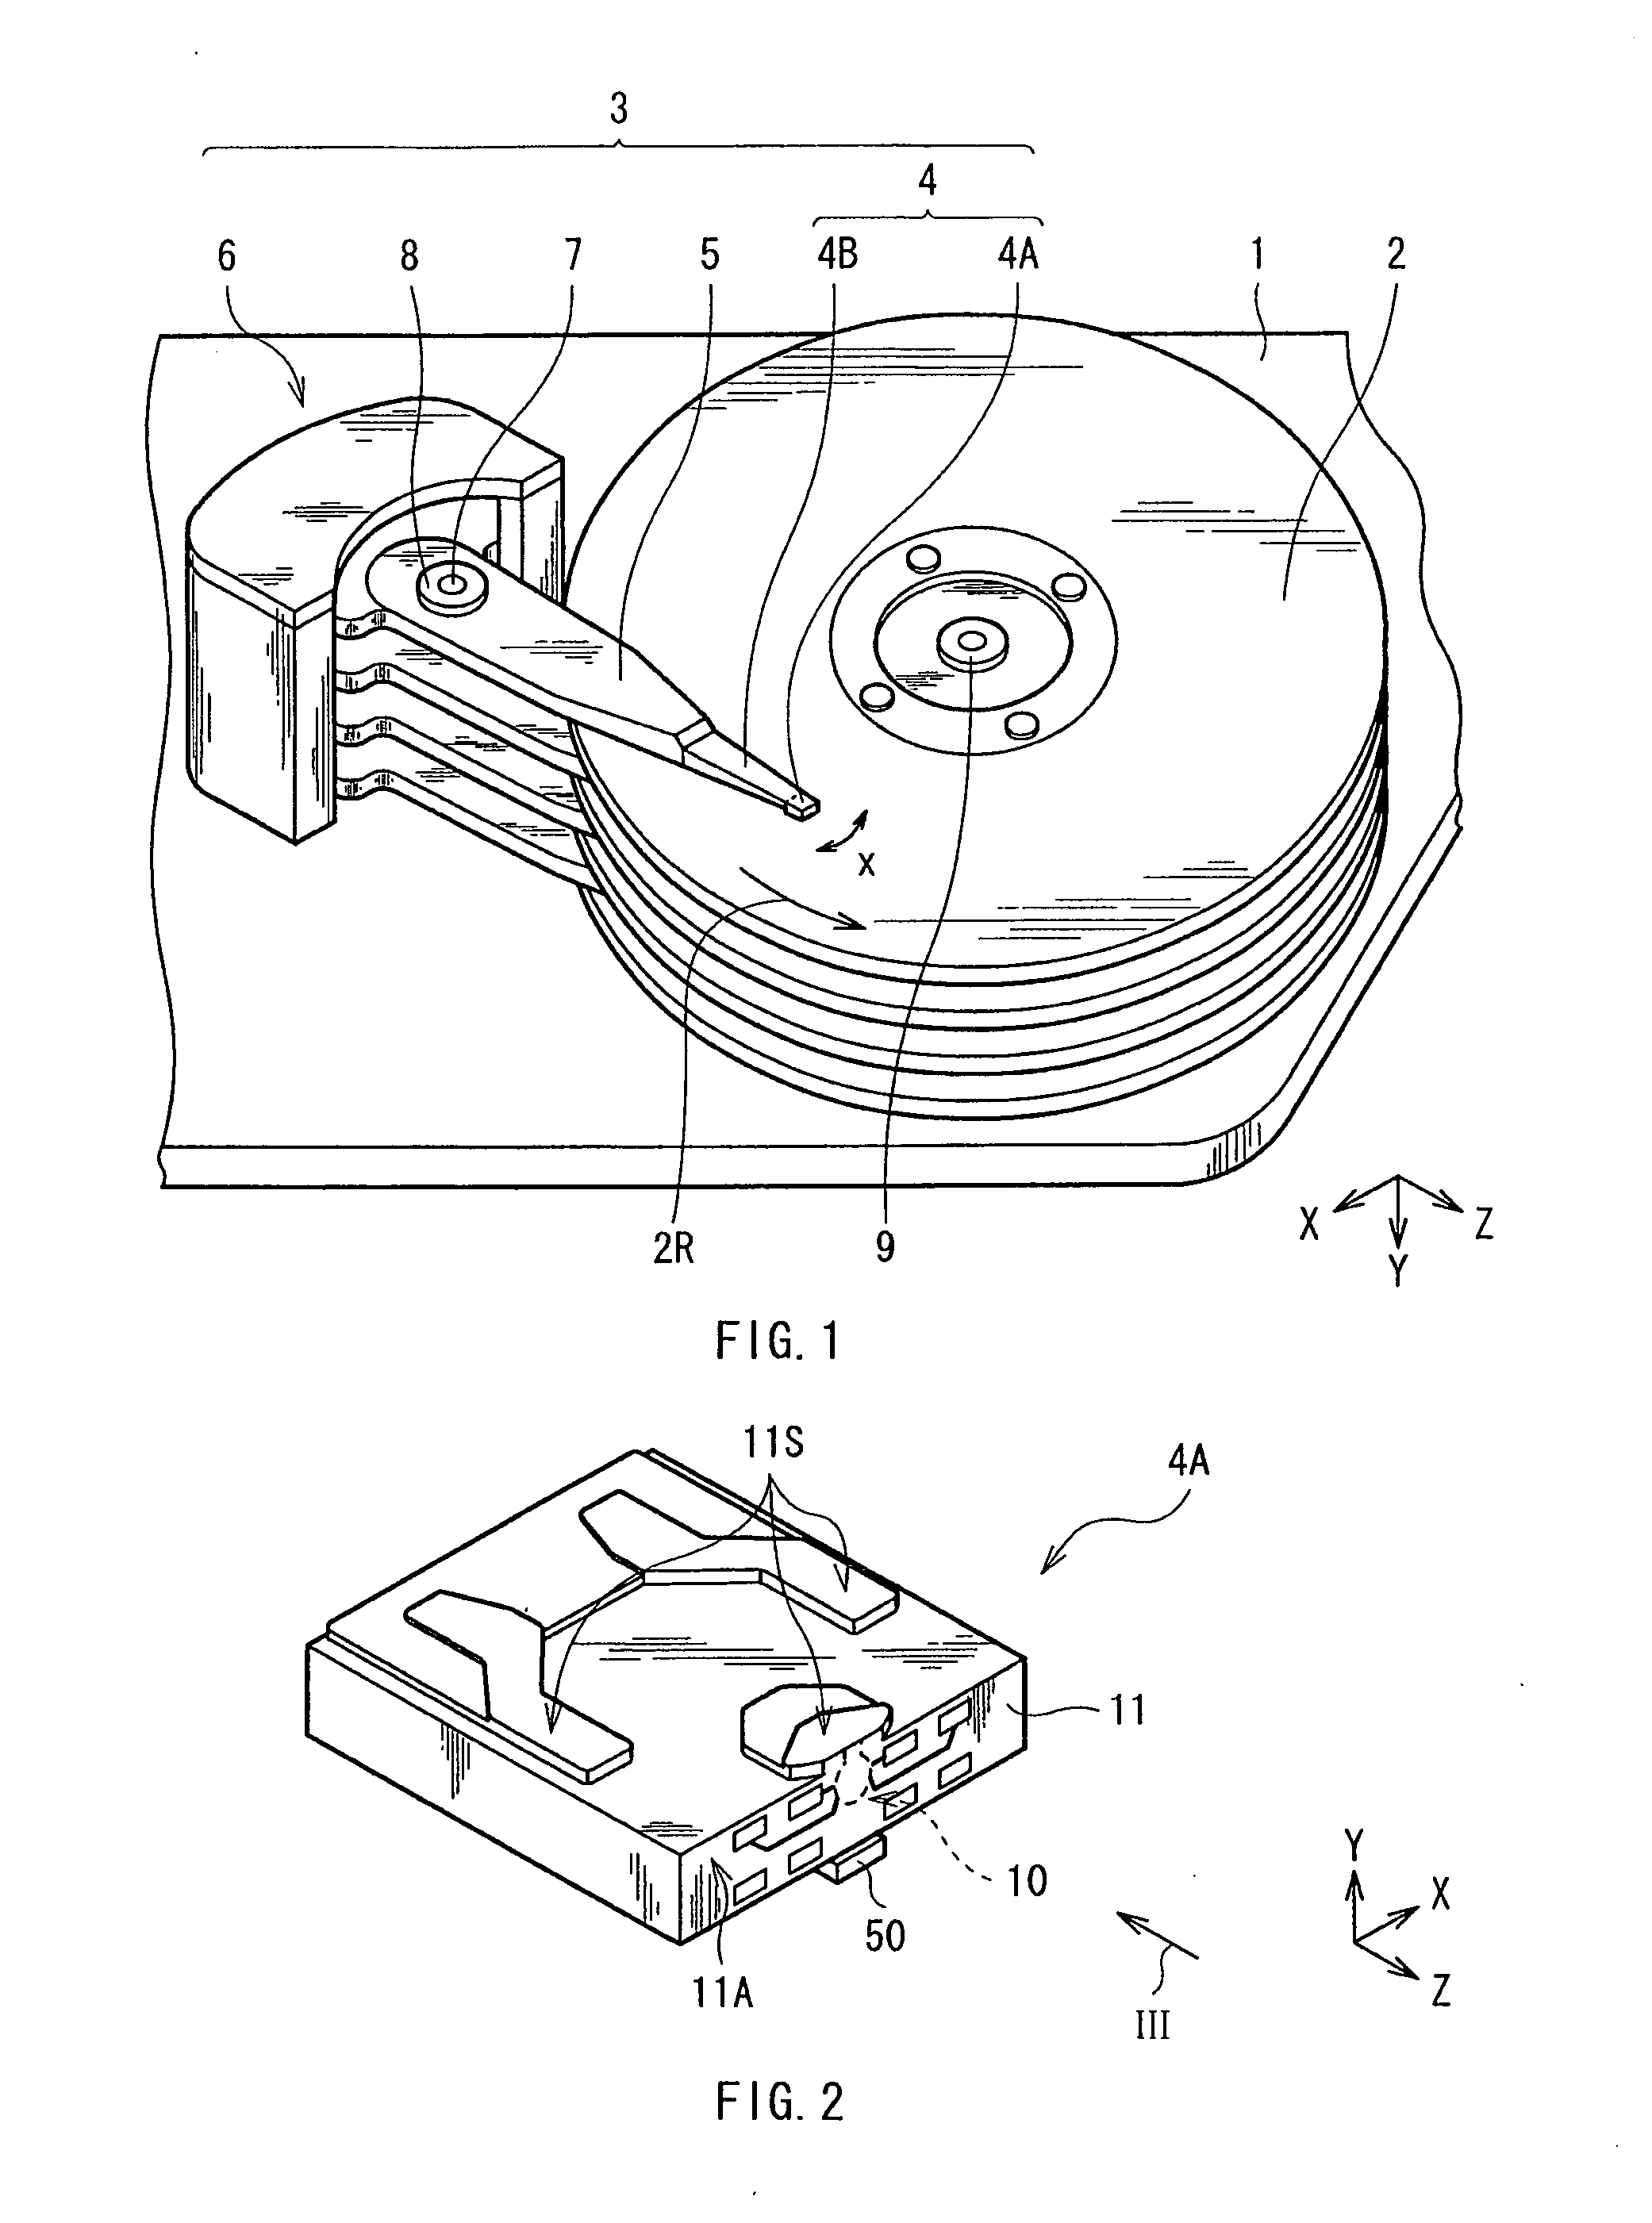 Thermally-assisted magnetic recording head, head gimbals assembly, head arm assembly, magnetic disk unit, and light transmission unit